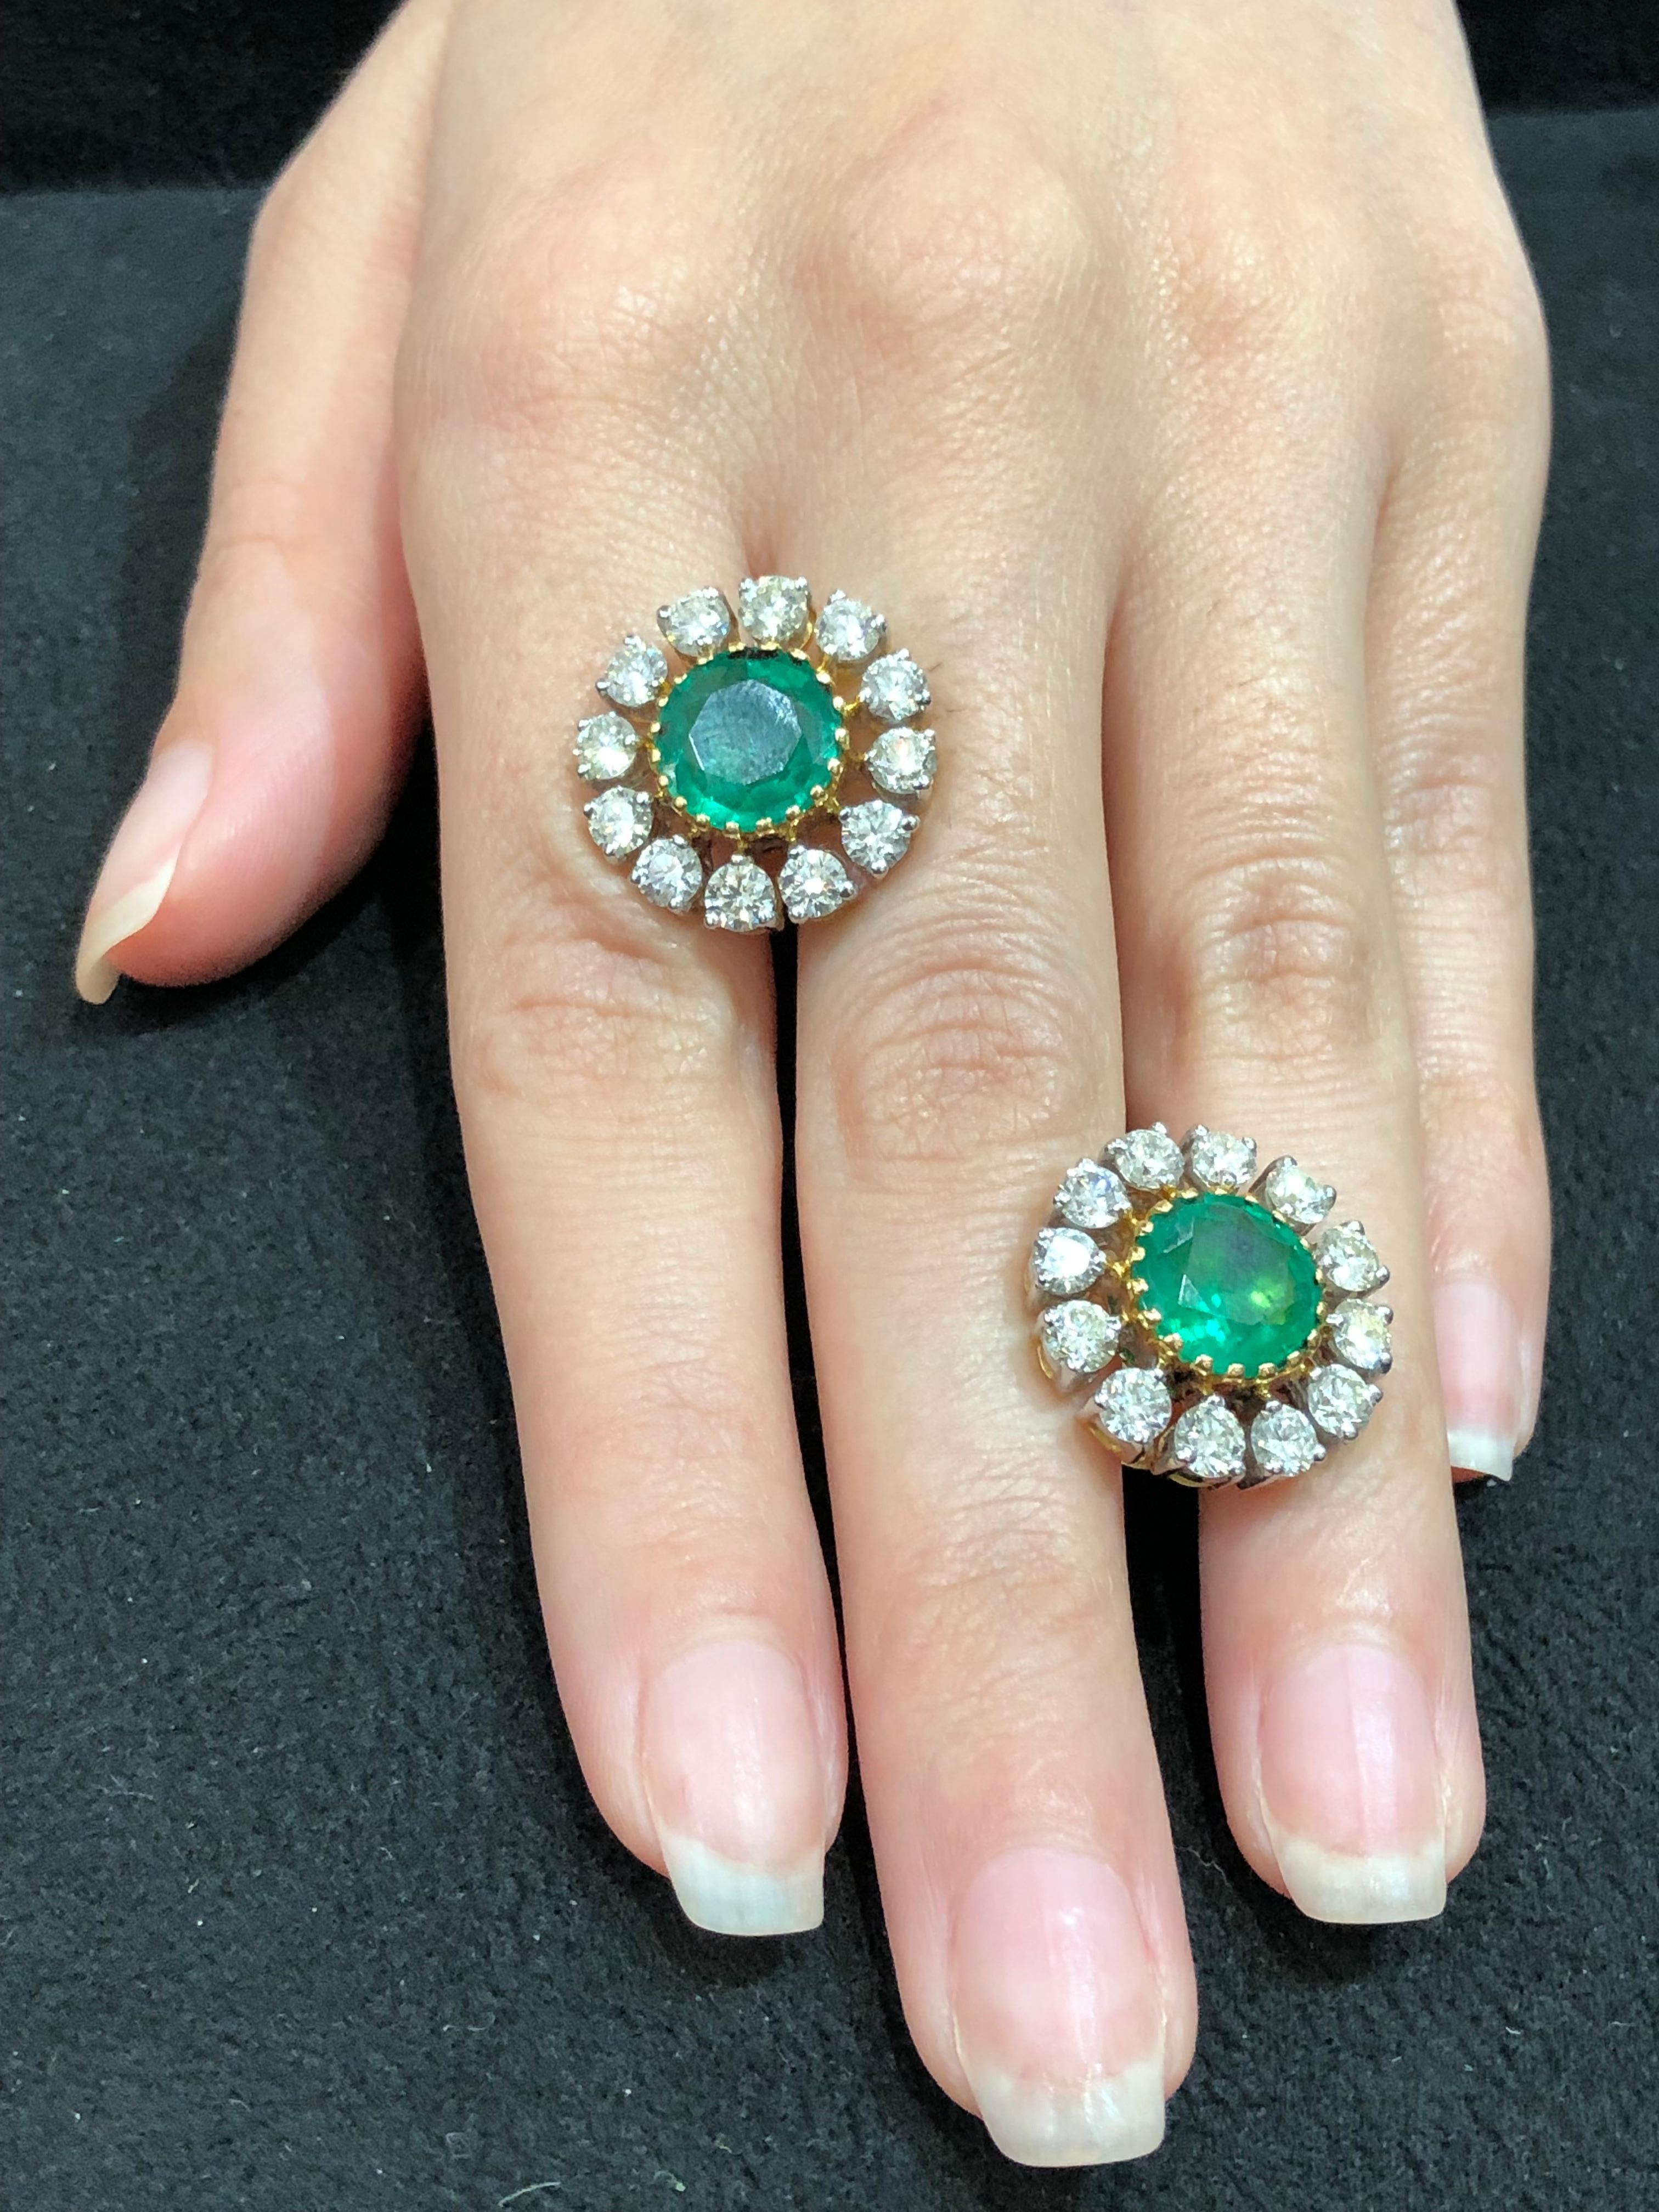 18kt gold, diamond and emerald studs

Diamonds 3.84 carats
Emeralds 4.96 carats
Gold 11.140 grams net
Ref No: DT - HHG

Perfectly symmetrical, the emeralds sit beautifully in a frame of 
brilliant round cut diamonds.